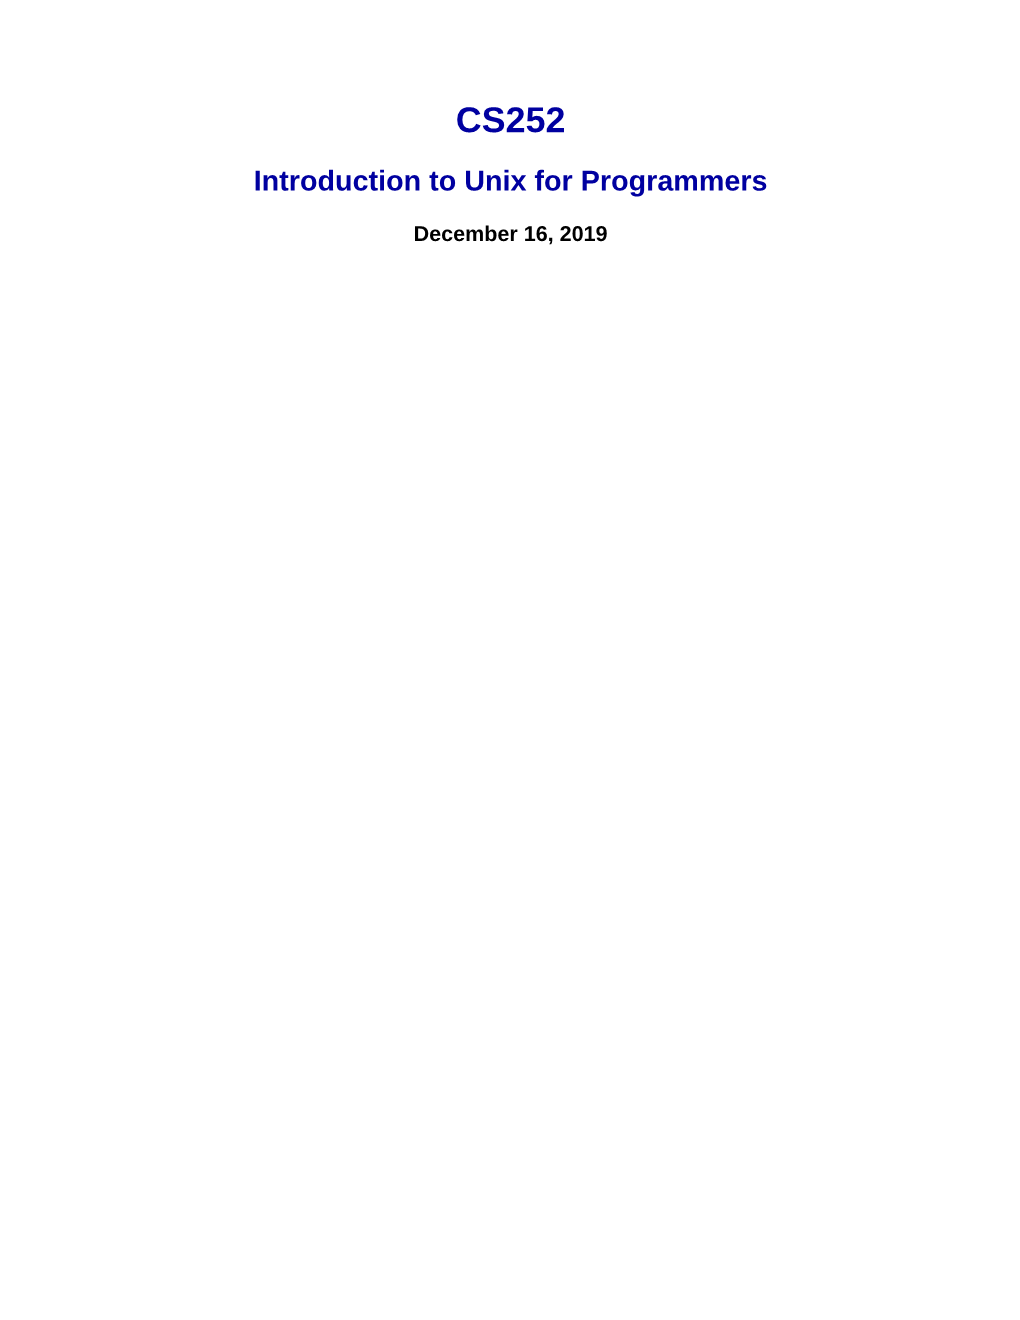 Introduction to Unix for Programmers